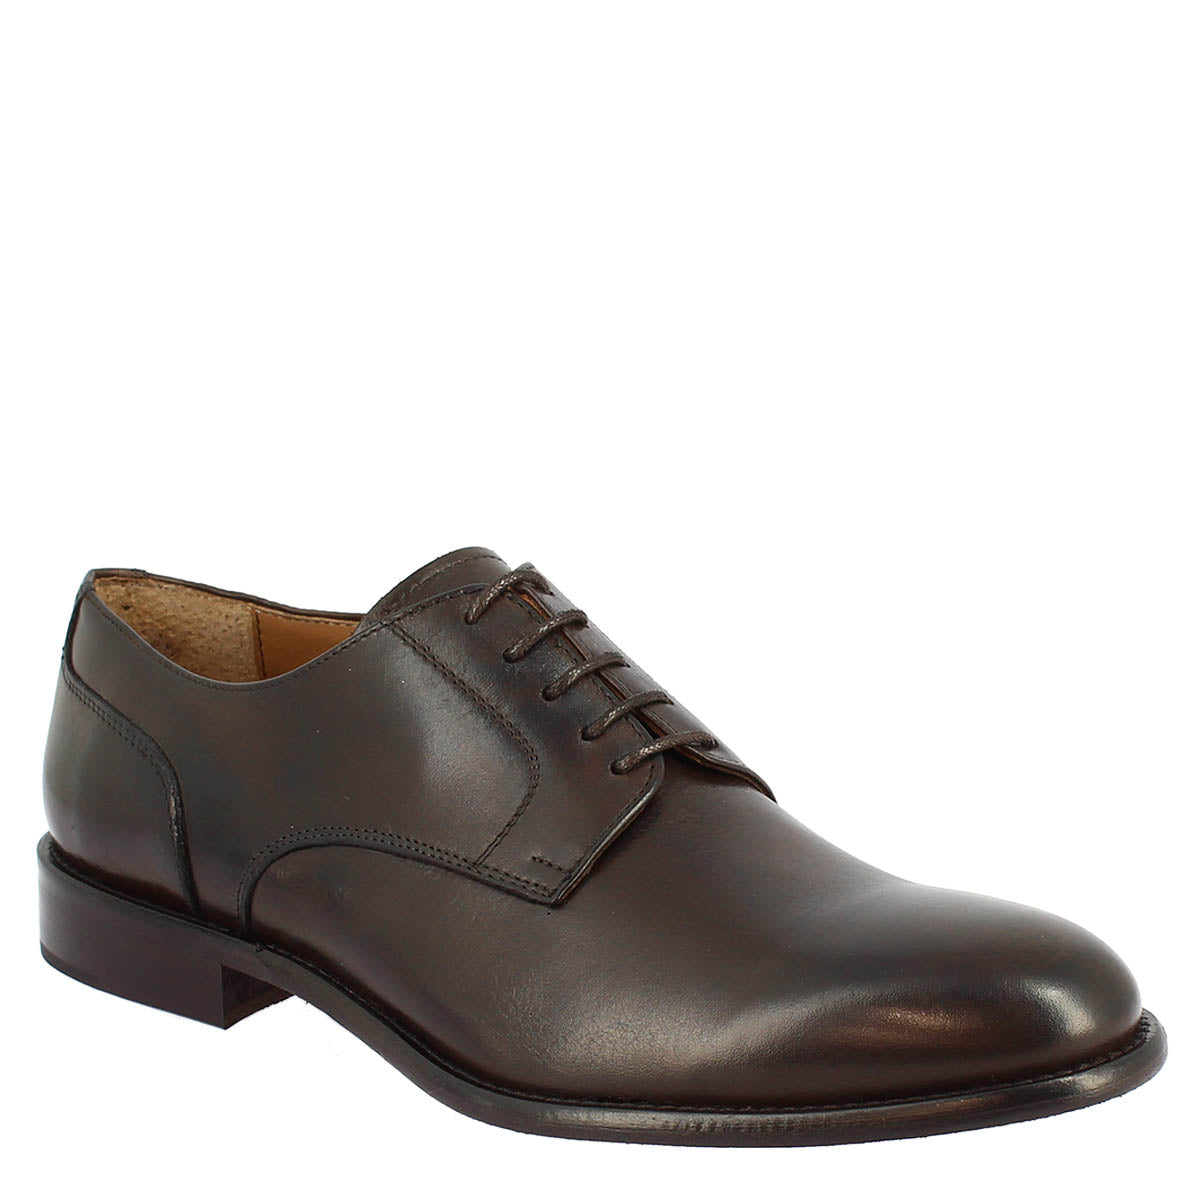 Handmade men's oxford shoes in dark brown leather